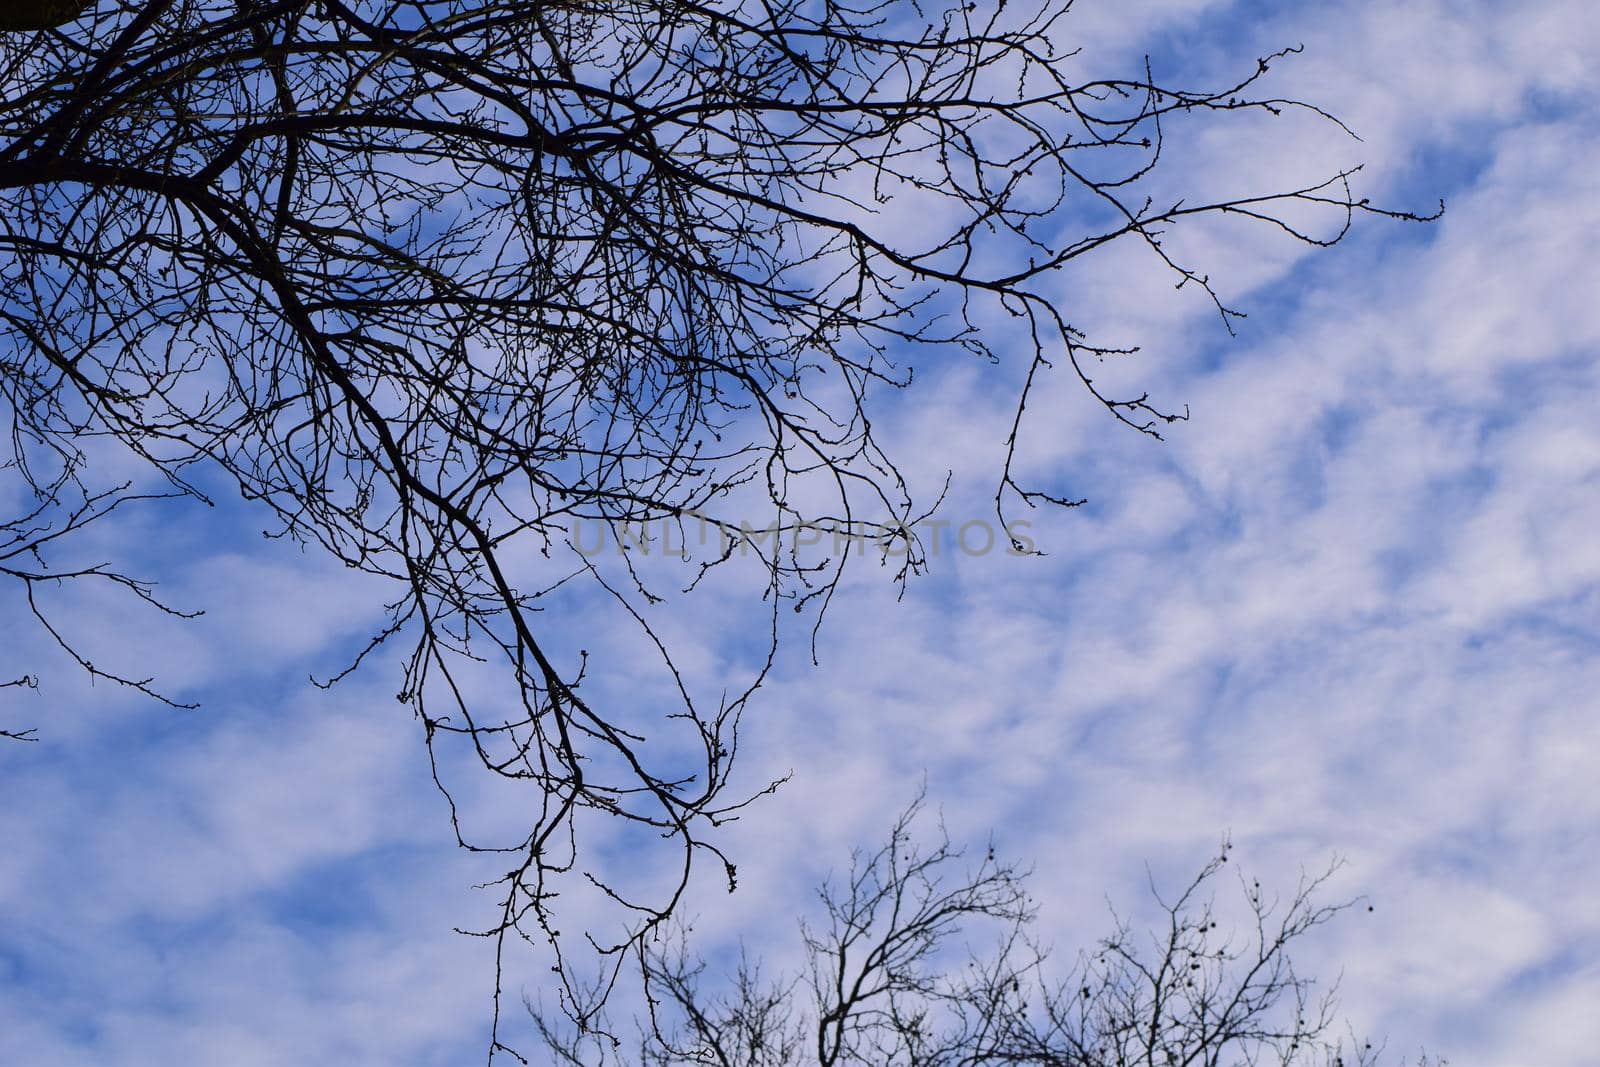 Bare plane tree branches from below against a sky with white clouds by Luise123